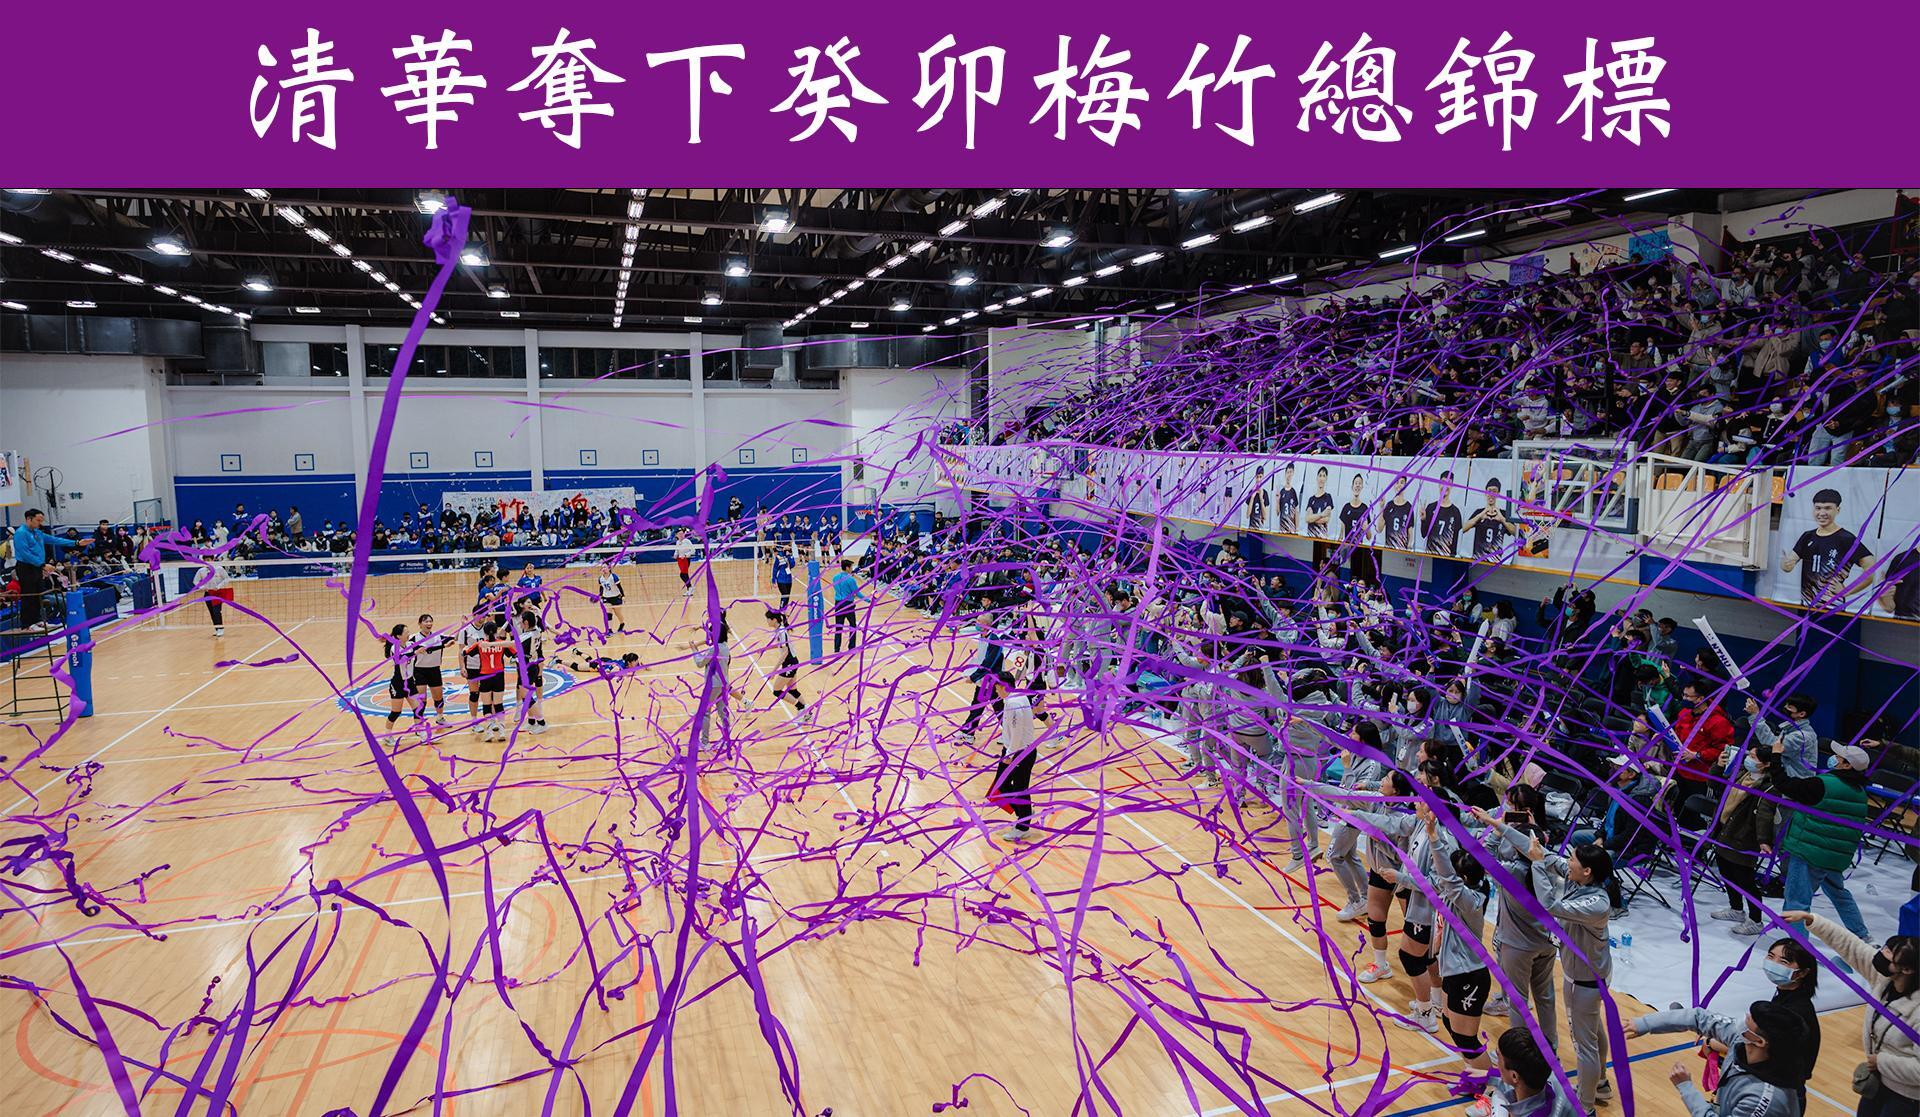 Purple streamers being tossed to celebrate the NTHU victory.